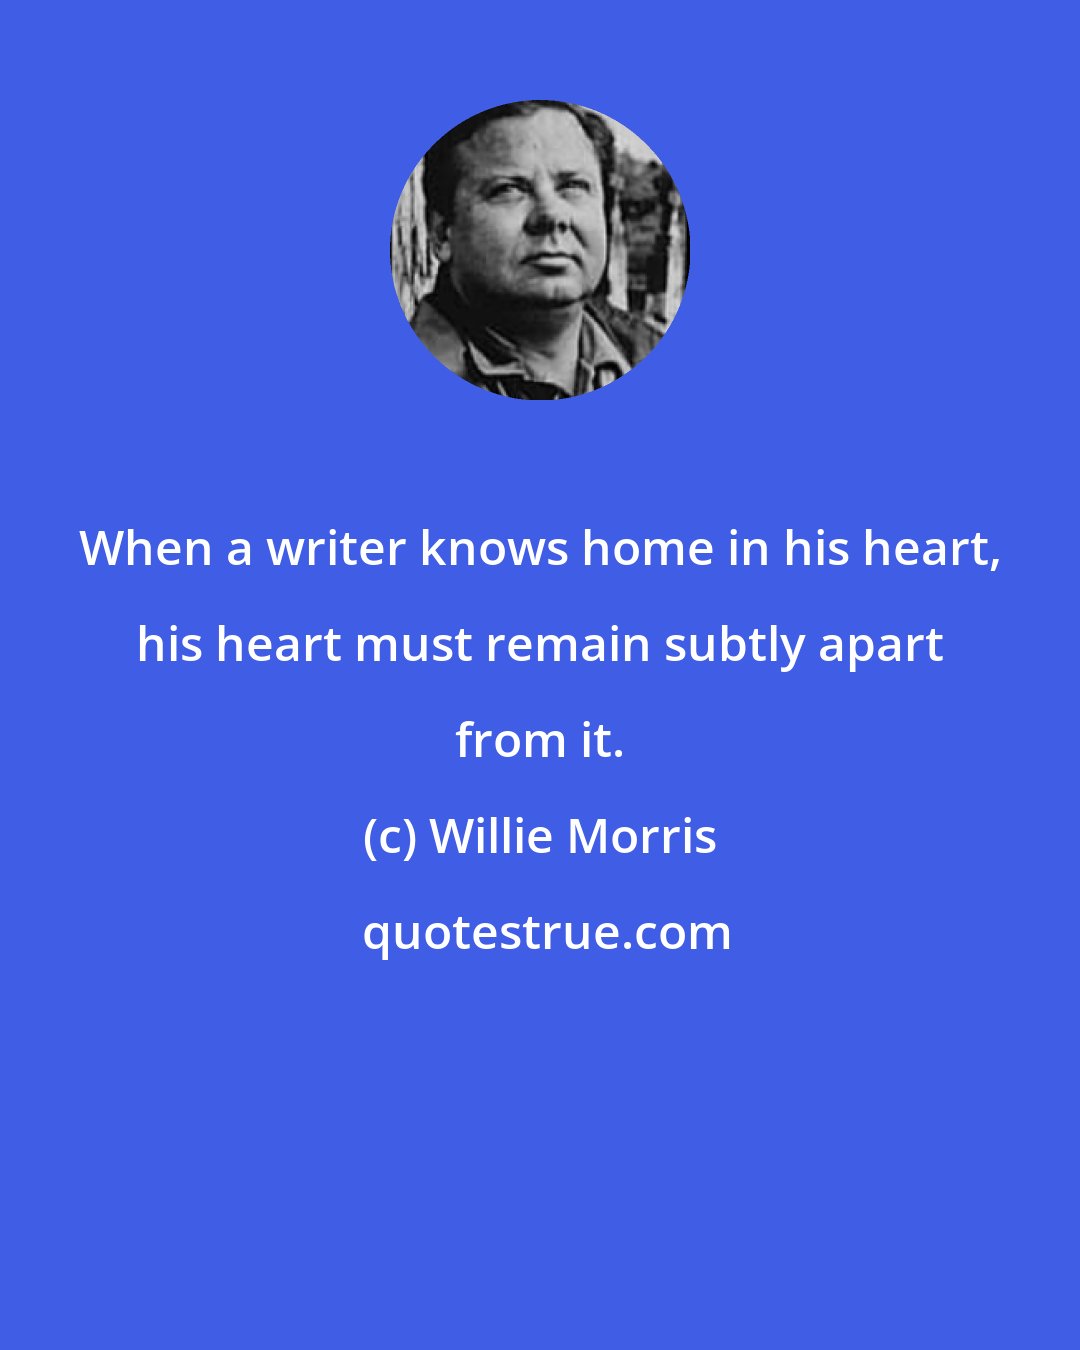 Willie Morris: When a writer knows home in his heart, his heart must remain subtly apart from it.